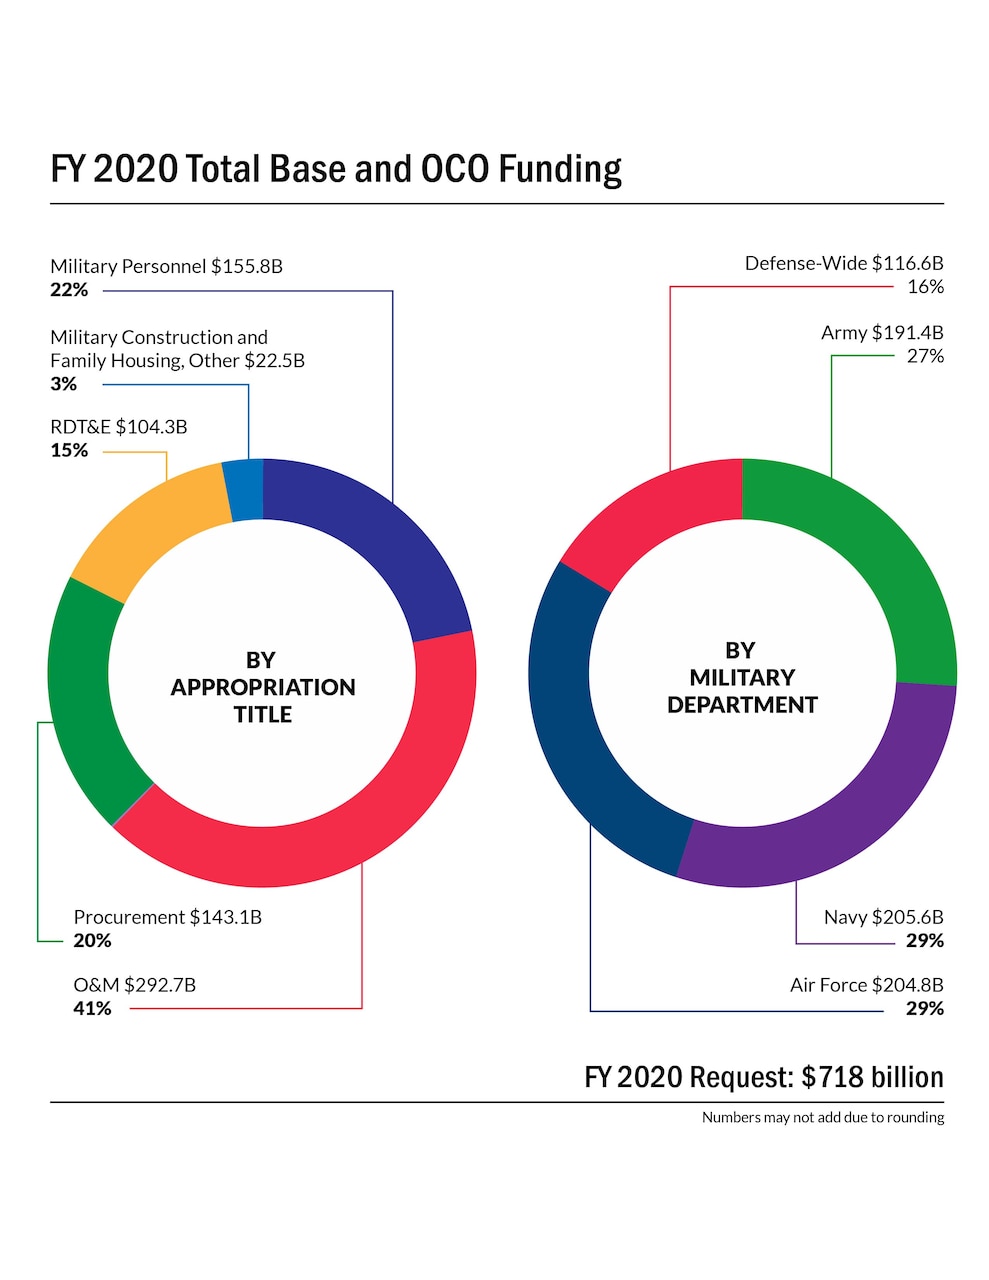 This graphic shows two circle graphs showing funding by appropriation title and military department.